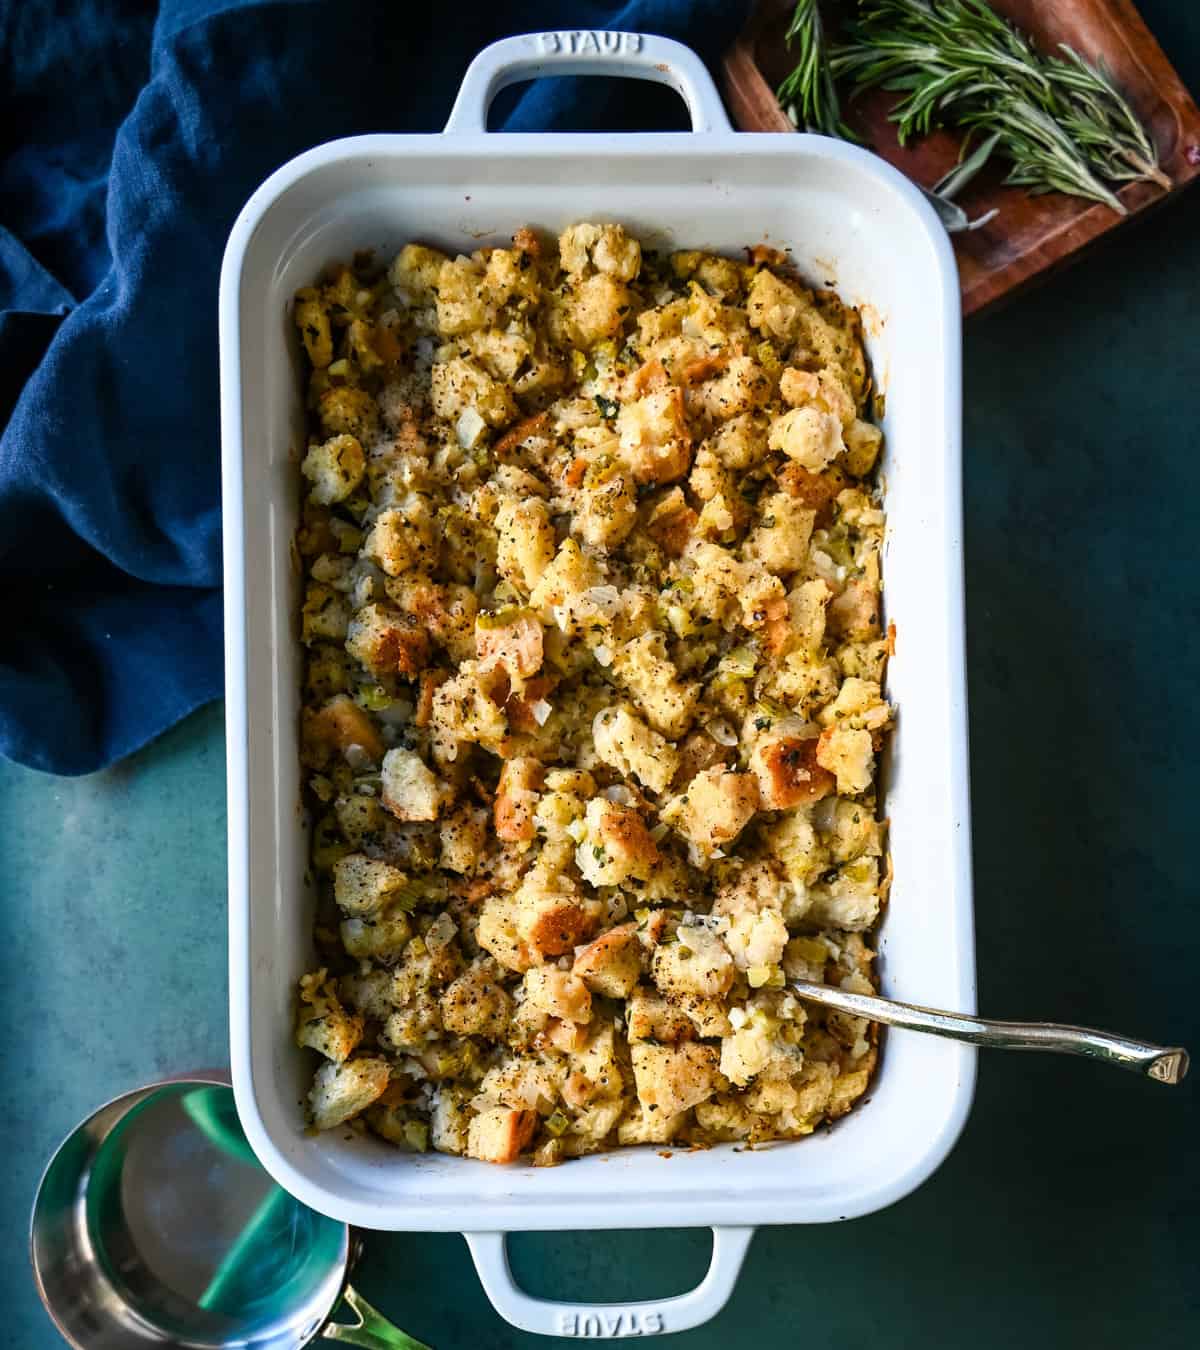 Classic Butter Herb Stuffing. How to make a foolproof, perfect, classic stuffing recipe with simple ingredients. This easy stuffing recipe is always a hit at Thanksgiving!